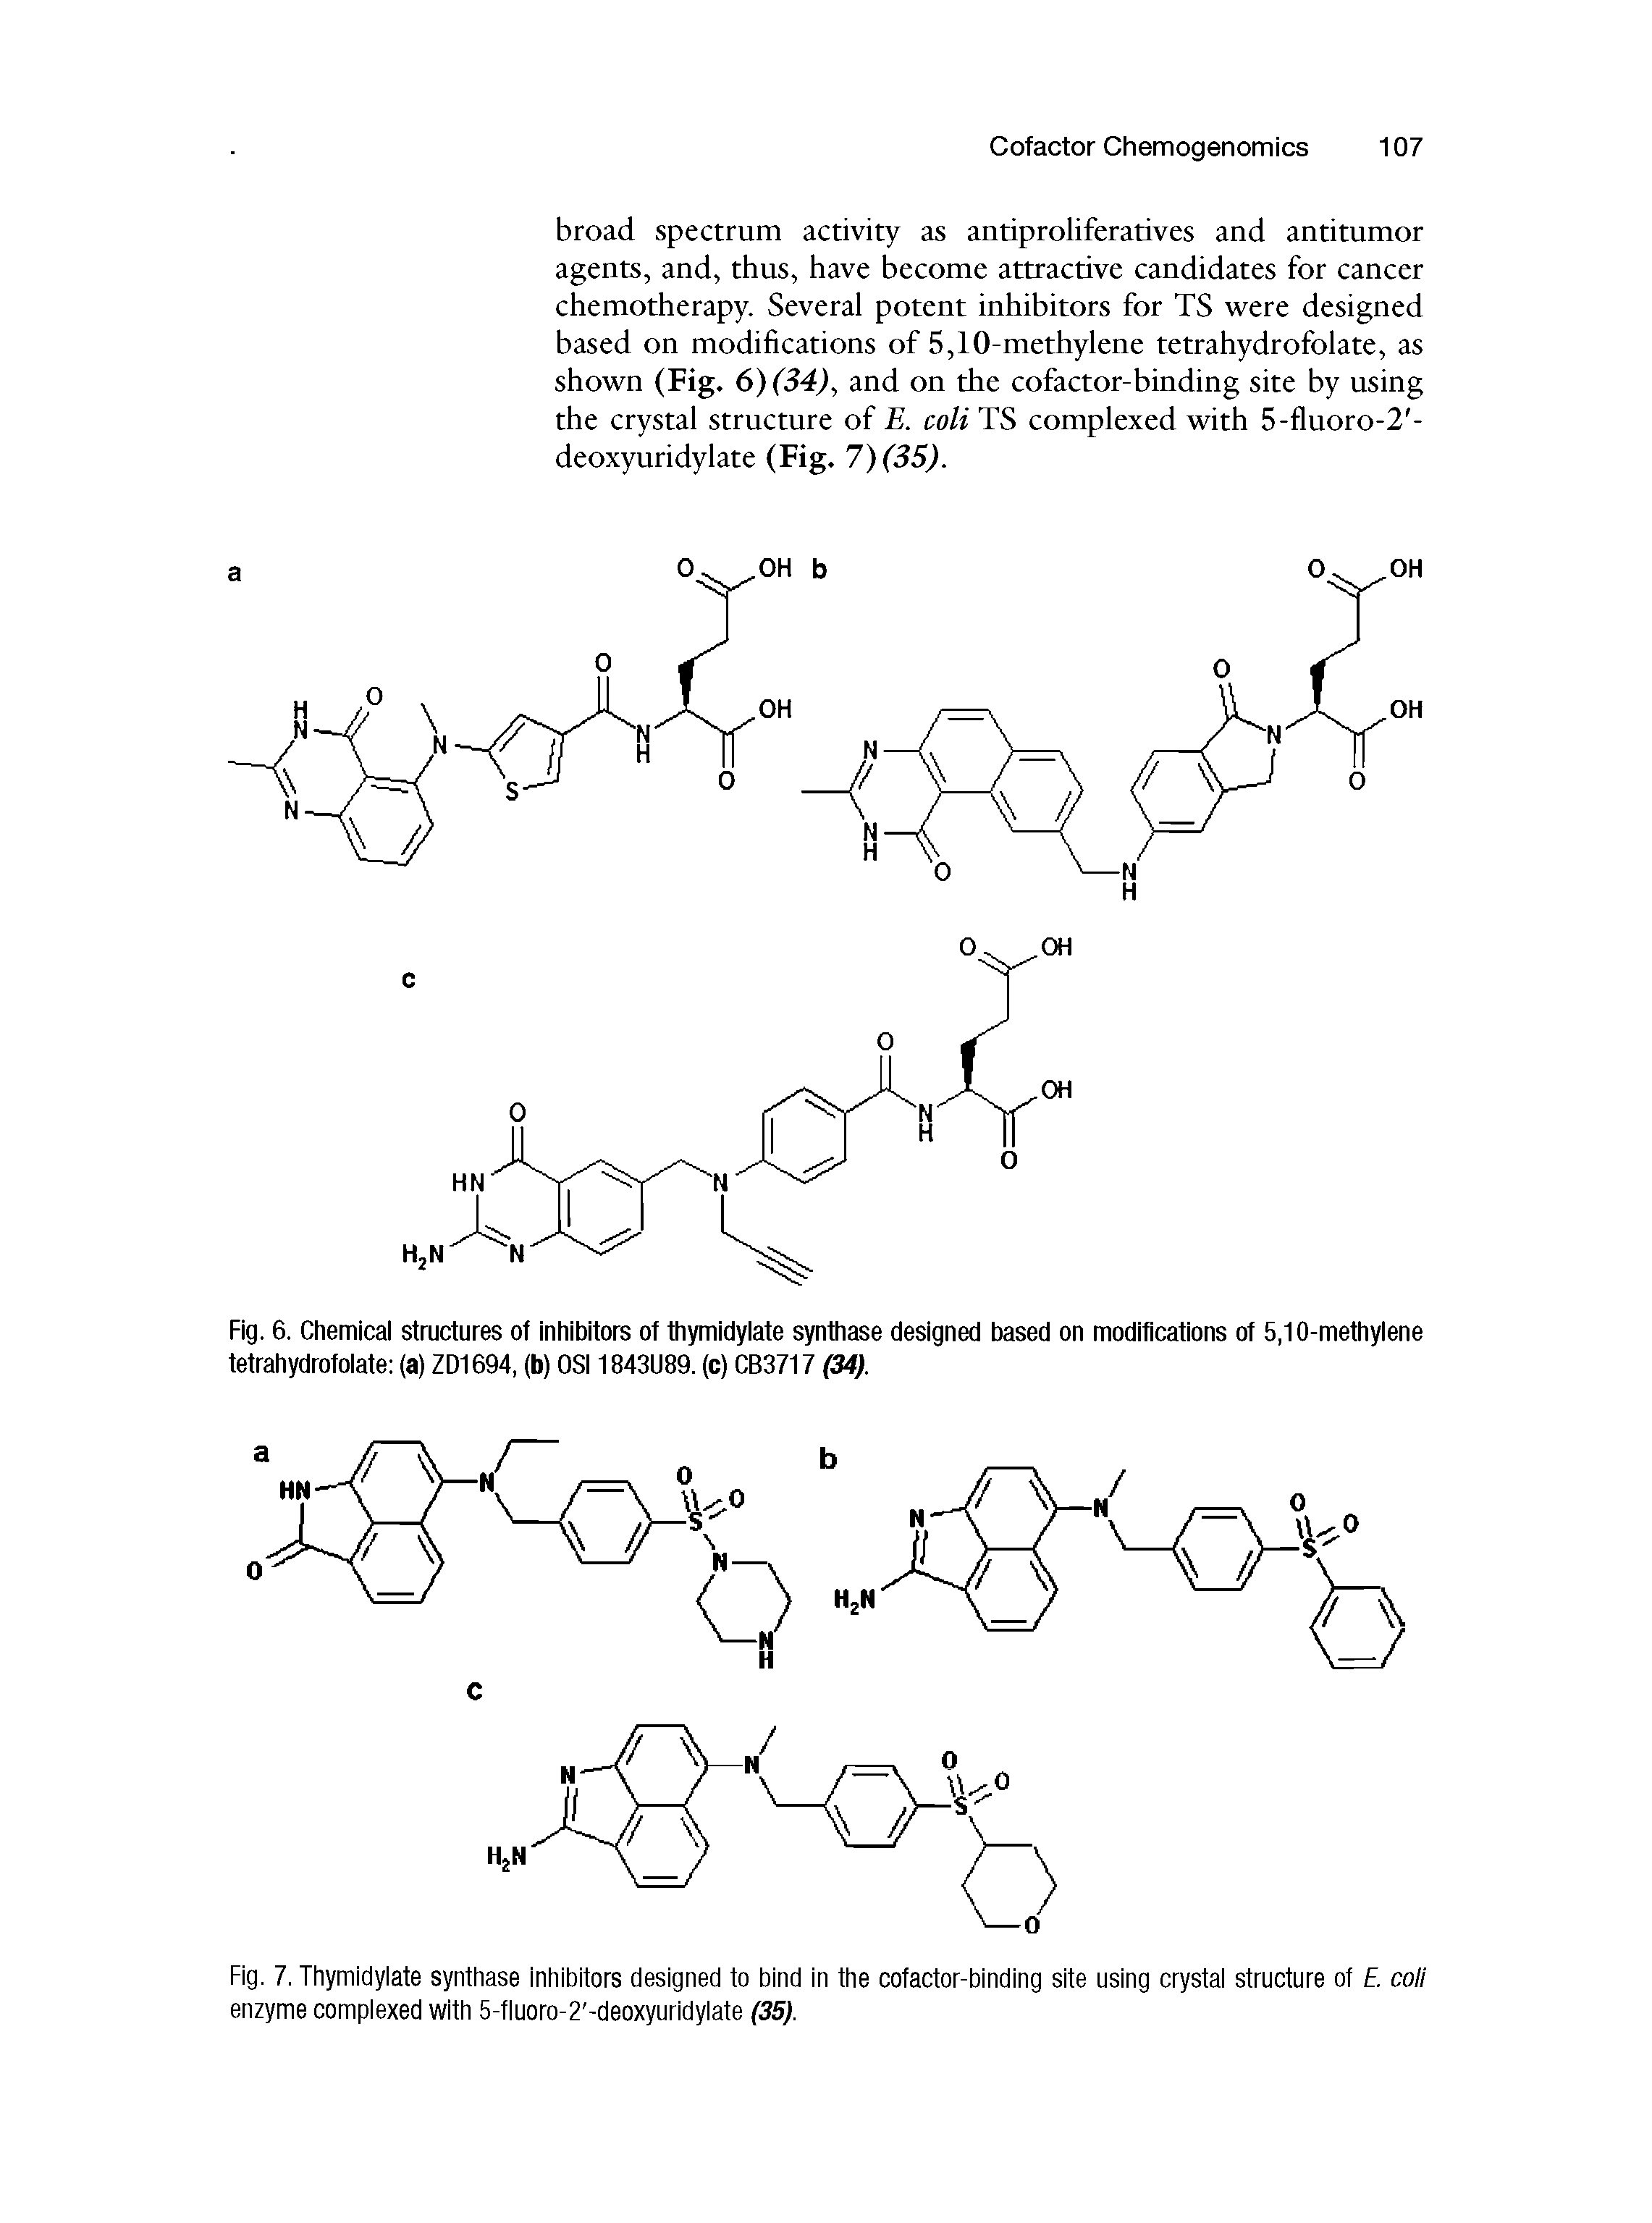 Fig. 6. Chemical structures of inhibitors of thymidylate synthase designed based on modifications of 5,10-methylene tetrahydrofolate (a) ZD1694, (b) OSI1843U89. (c) CB3717 (34).